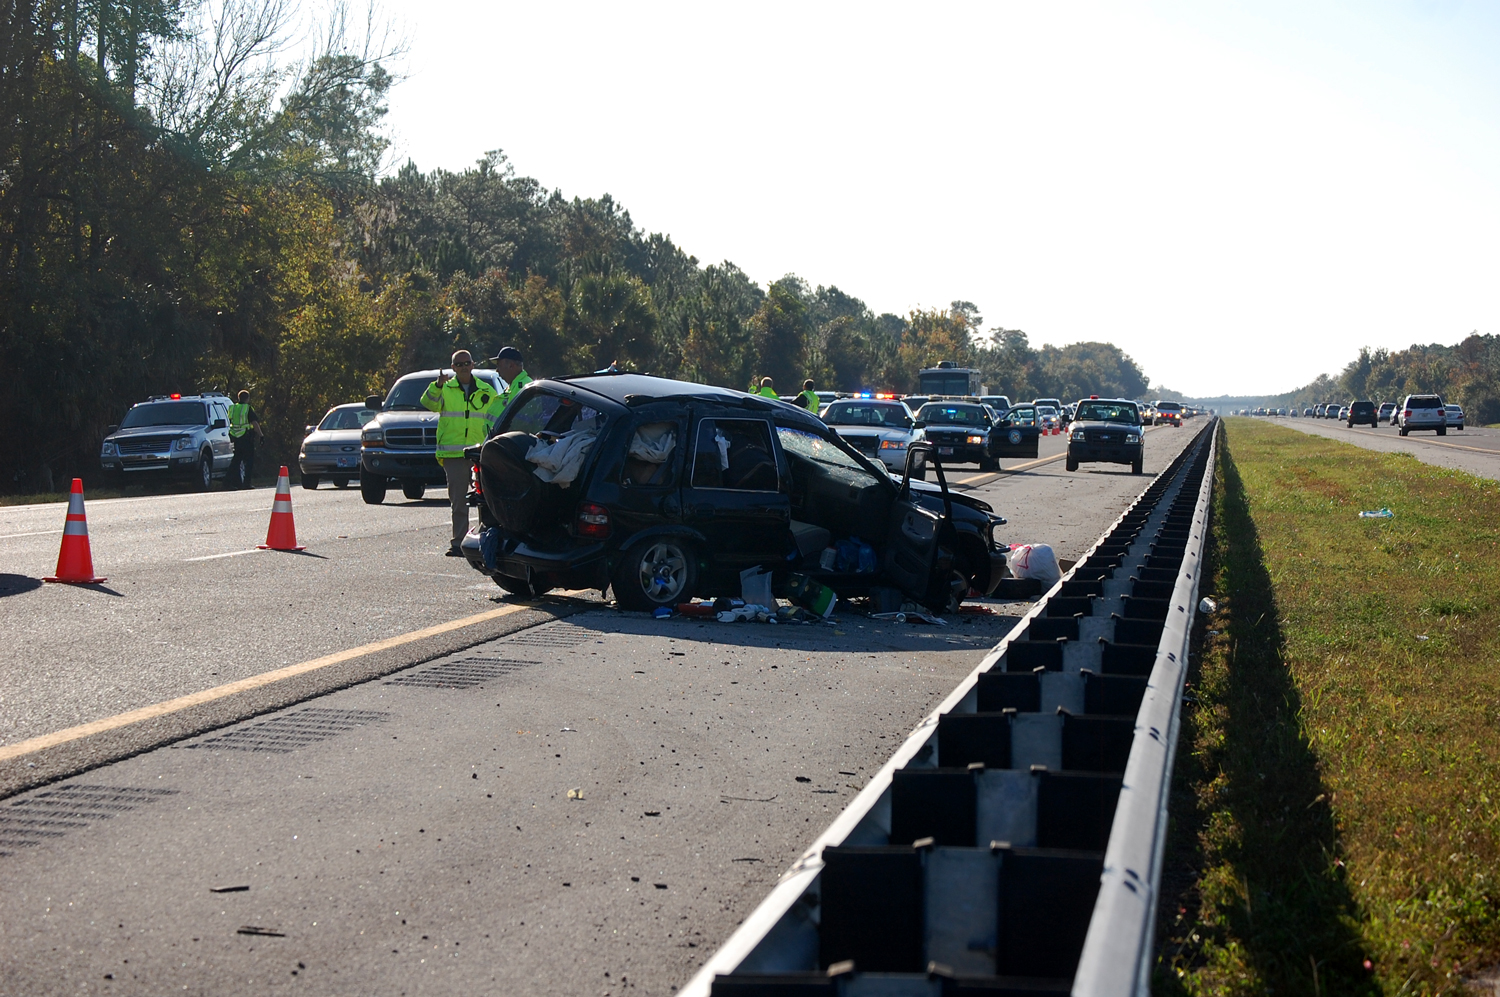 The Kia Sportage was one of two vehicles involved in the Sunday morning wreck on I-95. (© FlaglerLive)